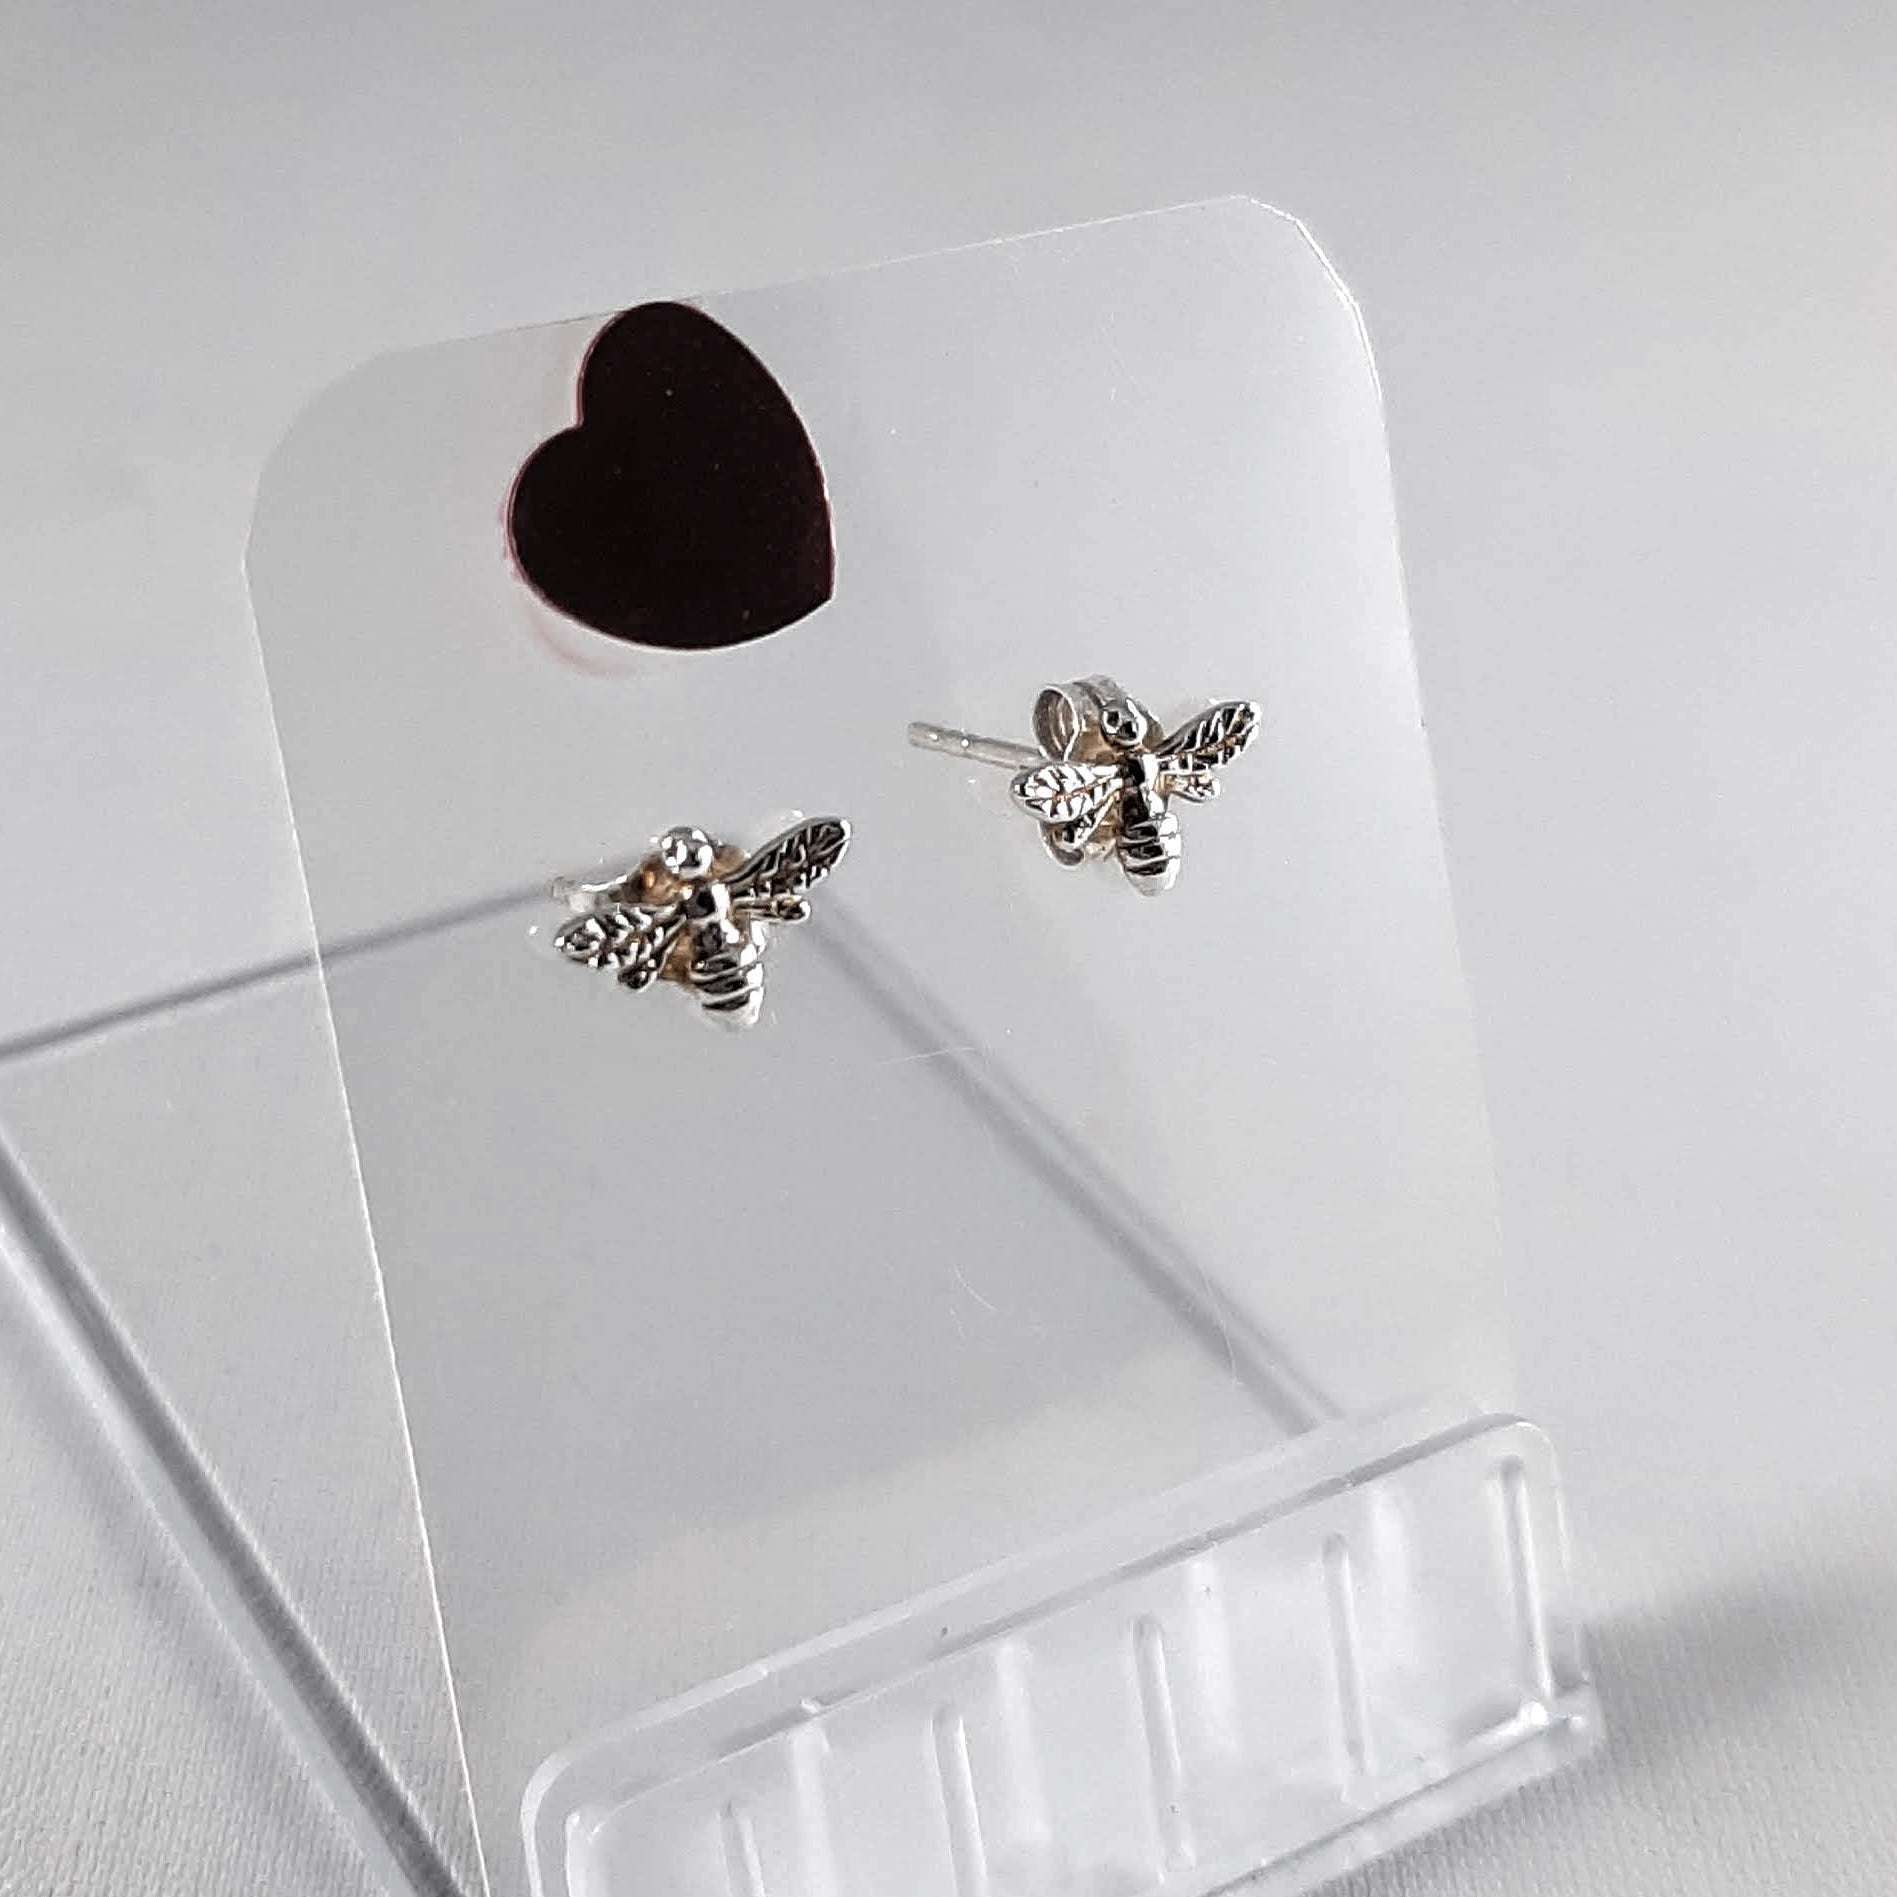 Organics Collection Sterling Silver Small Honey Bee Stud Earrings